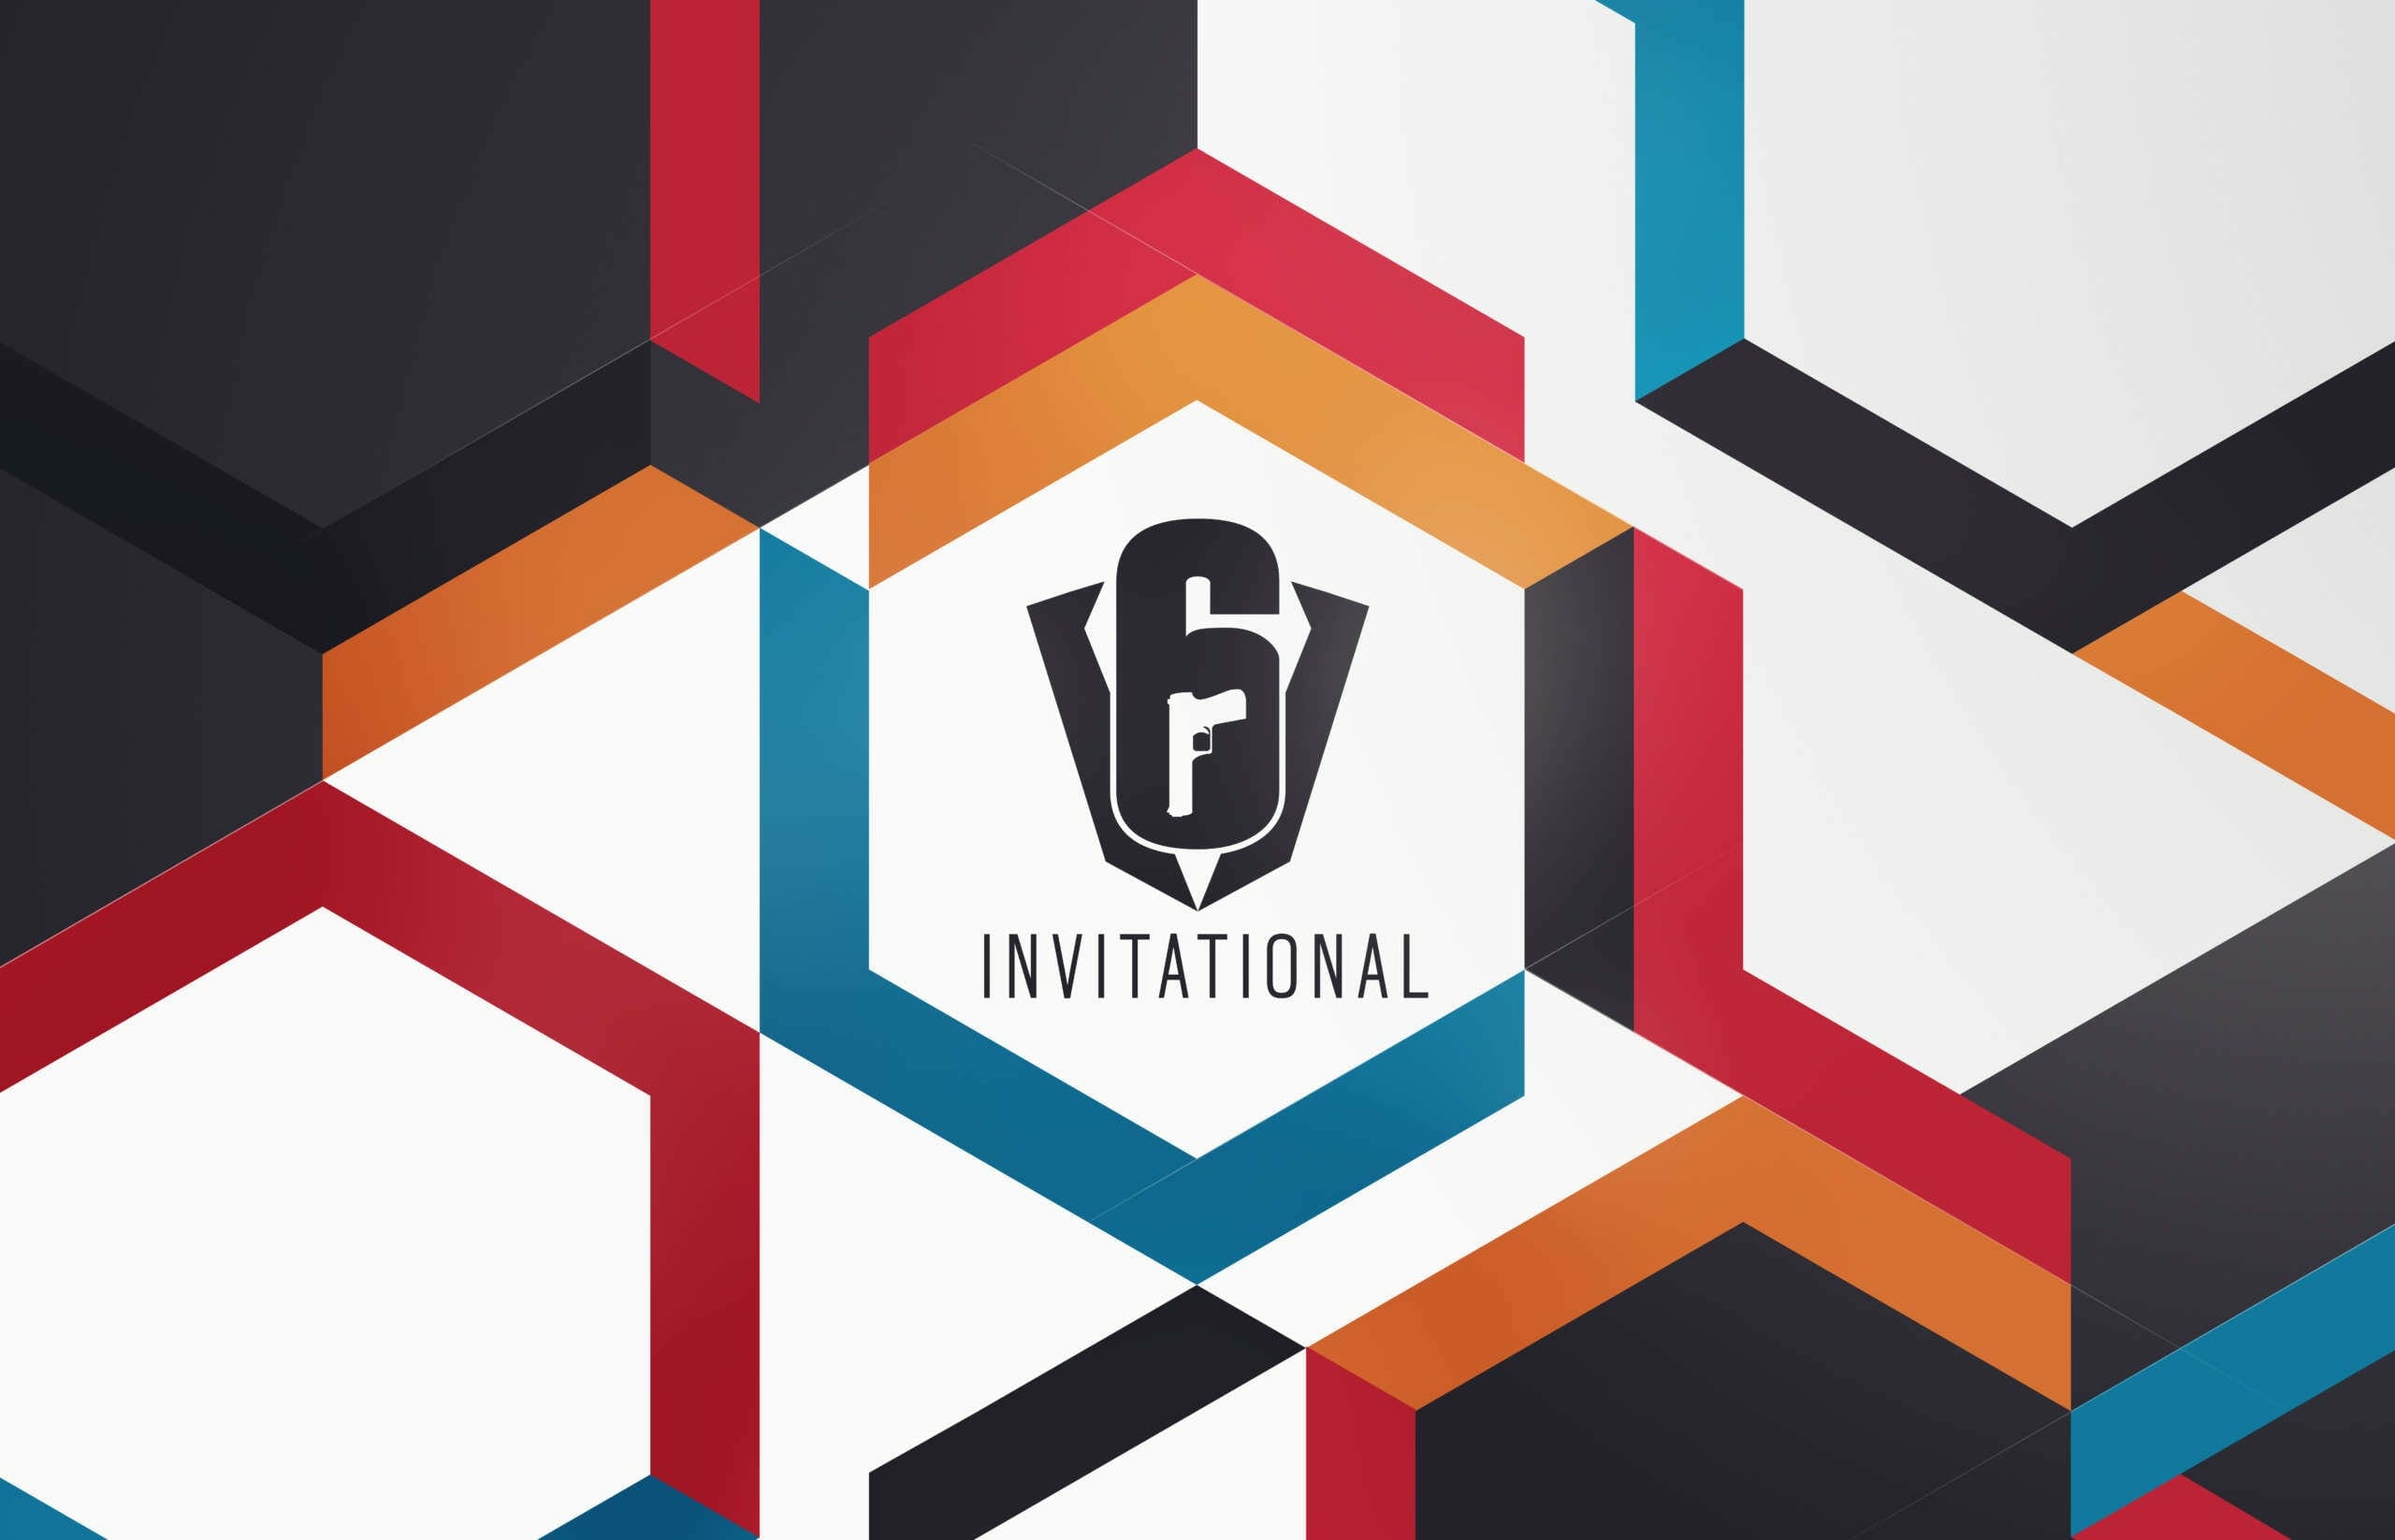 The Road to Six Invitational InGame Event for Rainbow Six